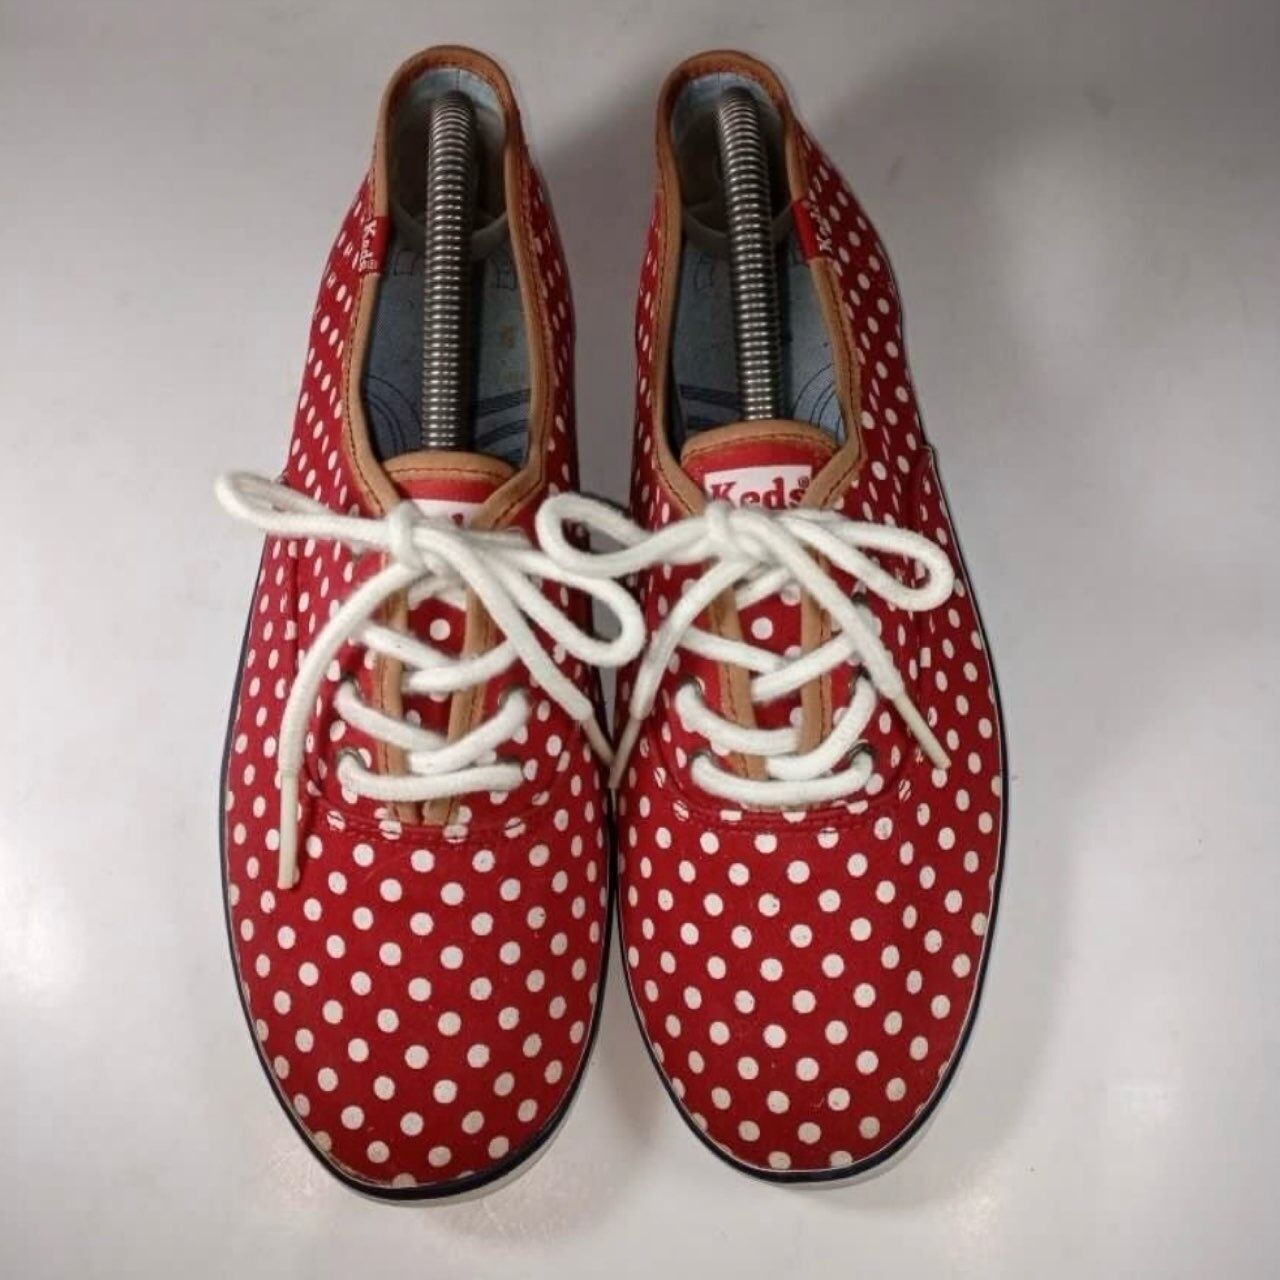 Keds Champion Canvas Red White Polka Dot Sneakers Women's